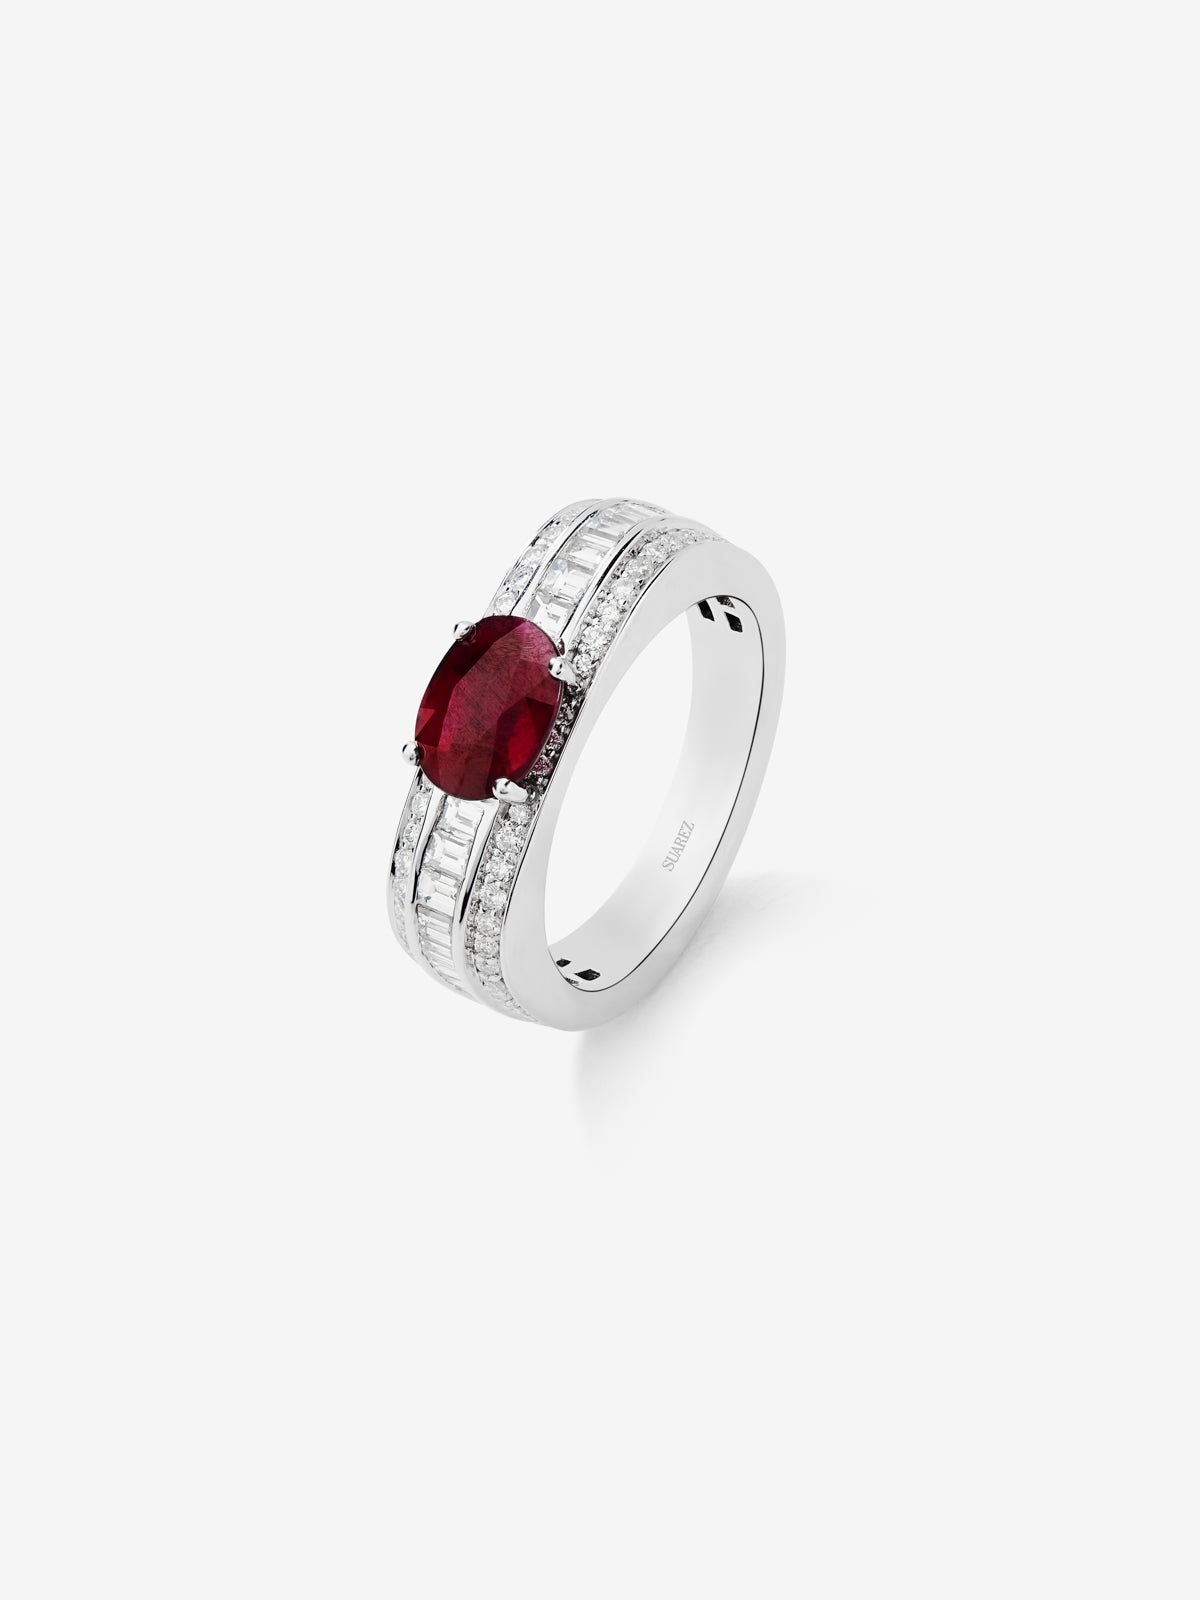 18K white gold ring with pigeon blood red ruby ​​in oval cut of 1.49 cts and 98 diamonds in baguette and brilliant cut with a total of 0.81 cts